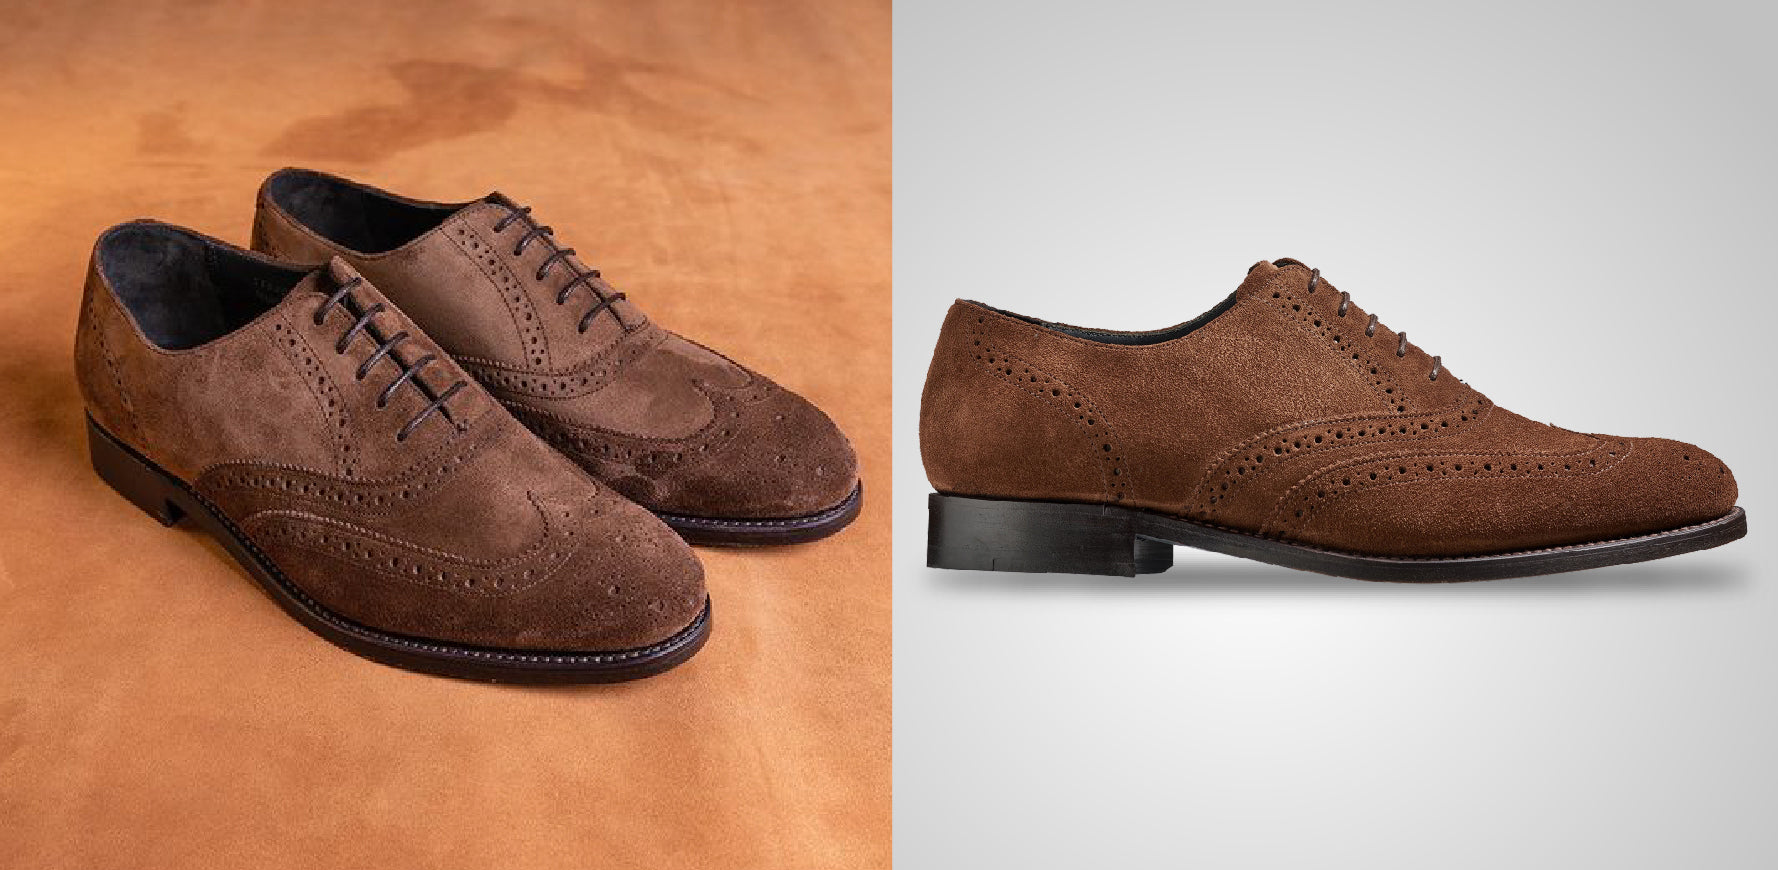 Chancery oxford shoes by Barker